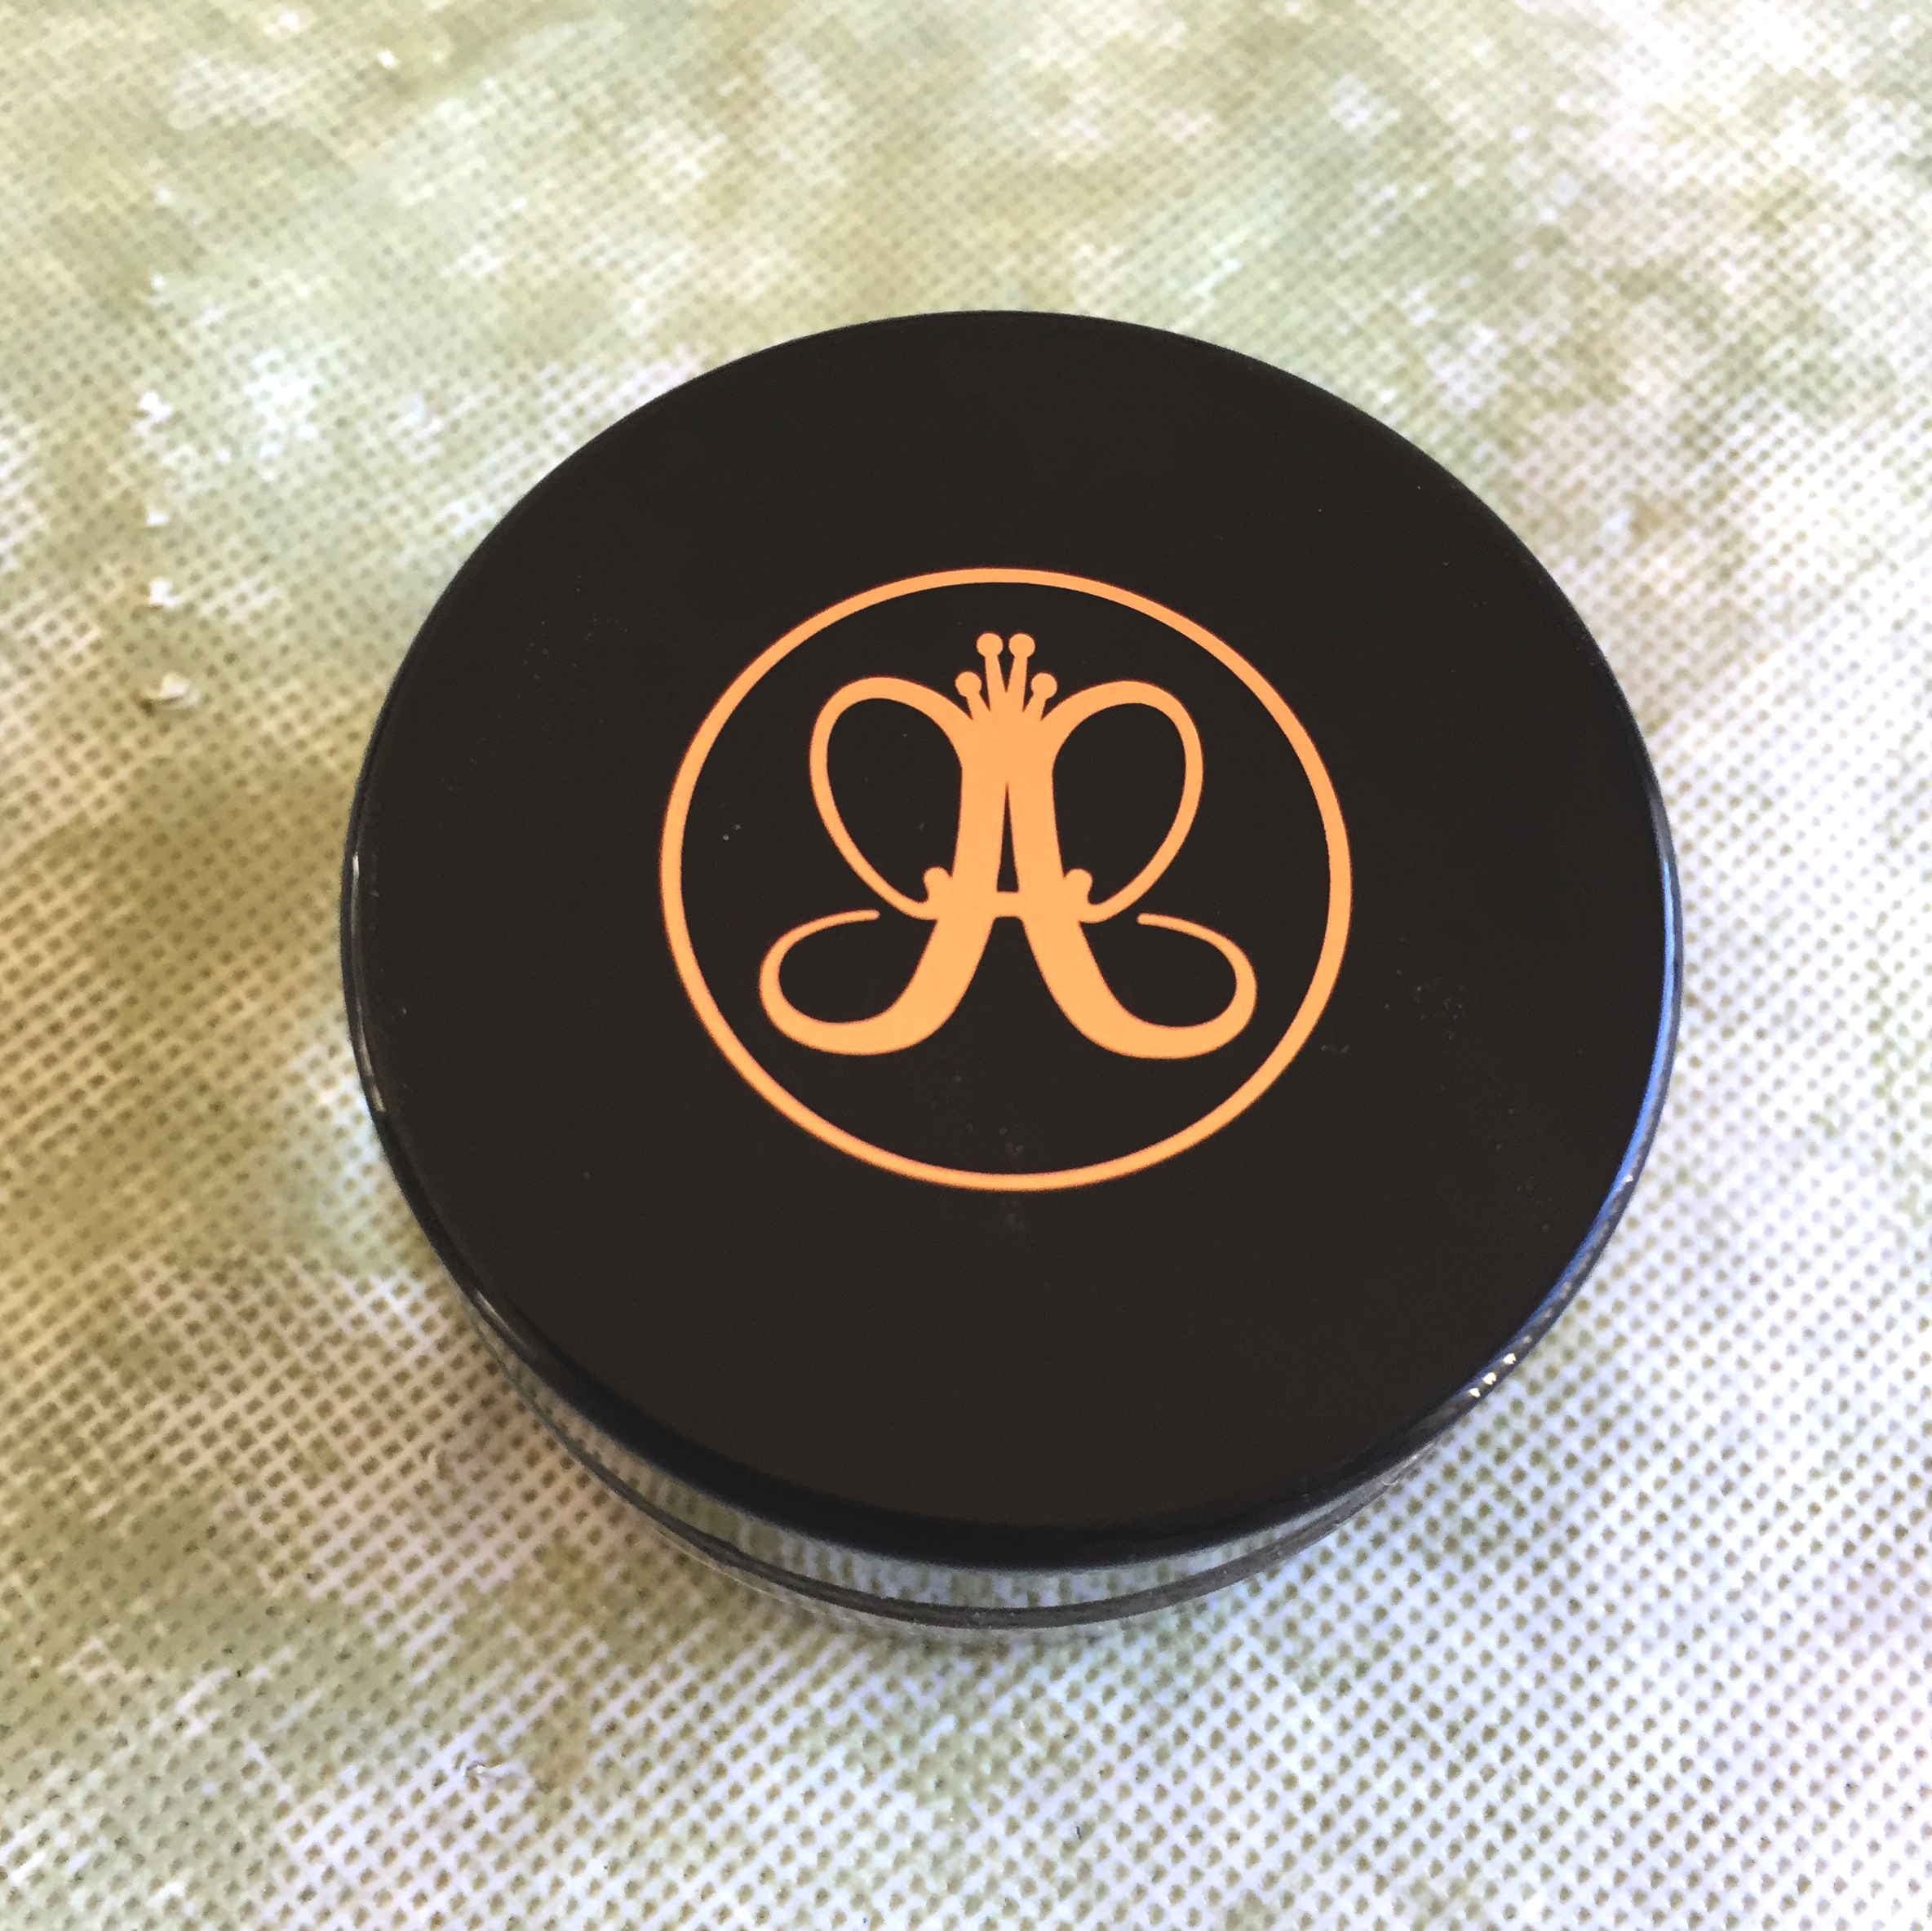 Anastasia Beverly Hills top cover of the Dipbrow Pomade.